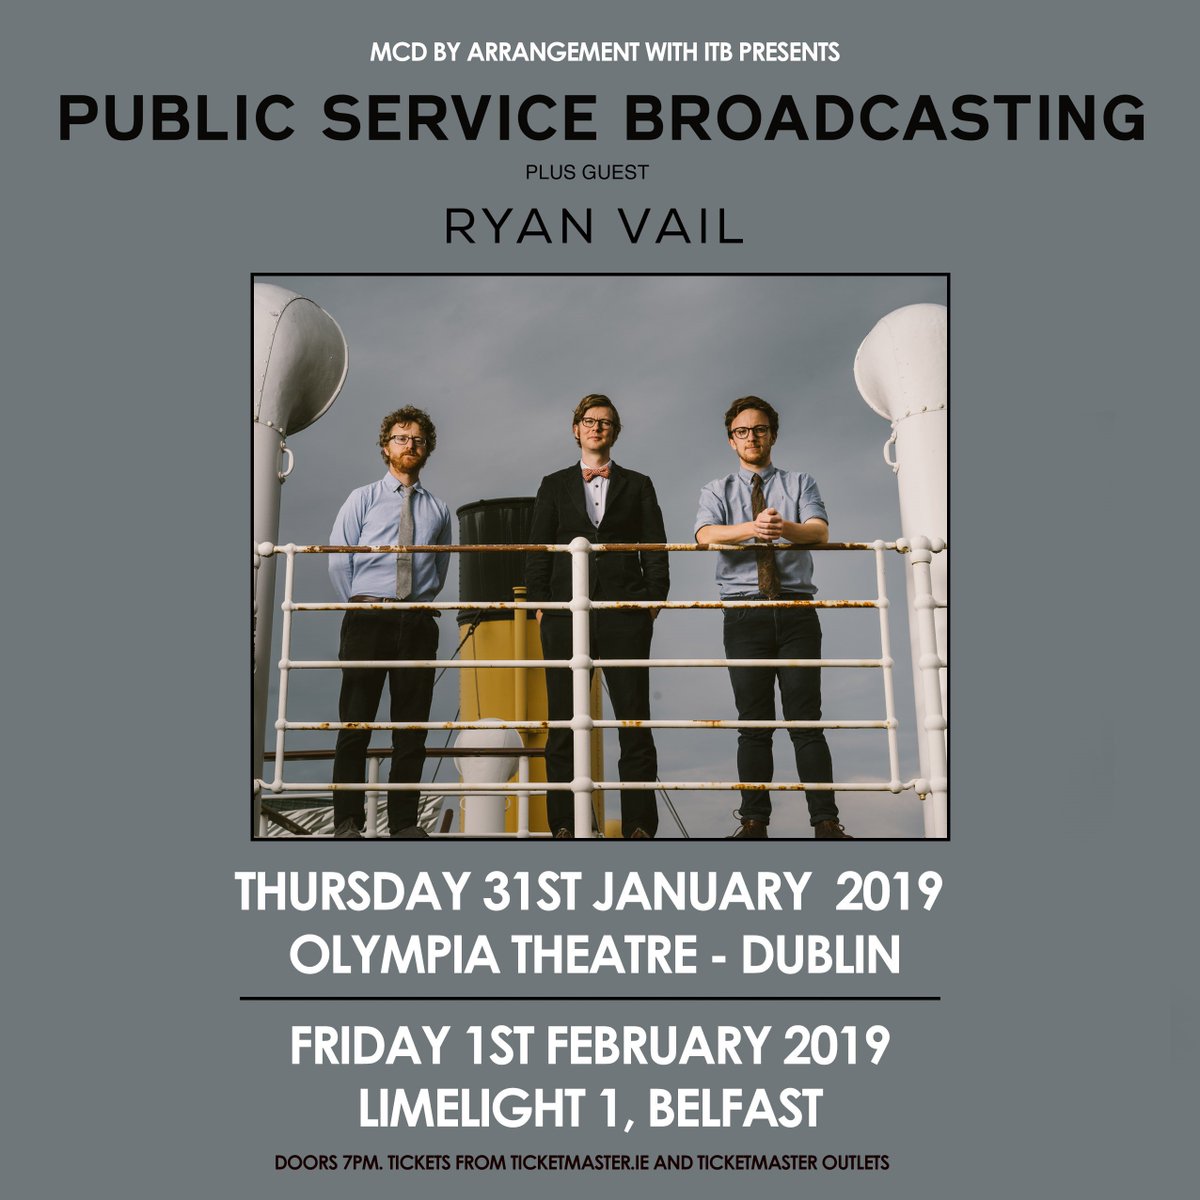 We're very happy to reveal that electronic artist @ryanvail will be joining us for our Dublin & Belfast shows in the new year. Final tickets available here: publicservicebroadcasting.net/?fbclid=IwAR2p…